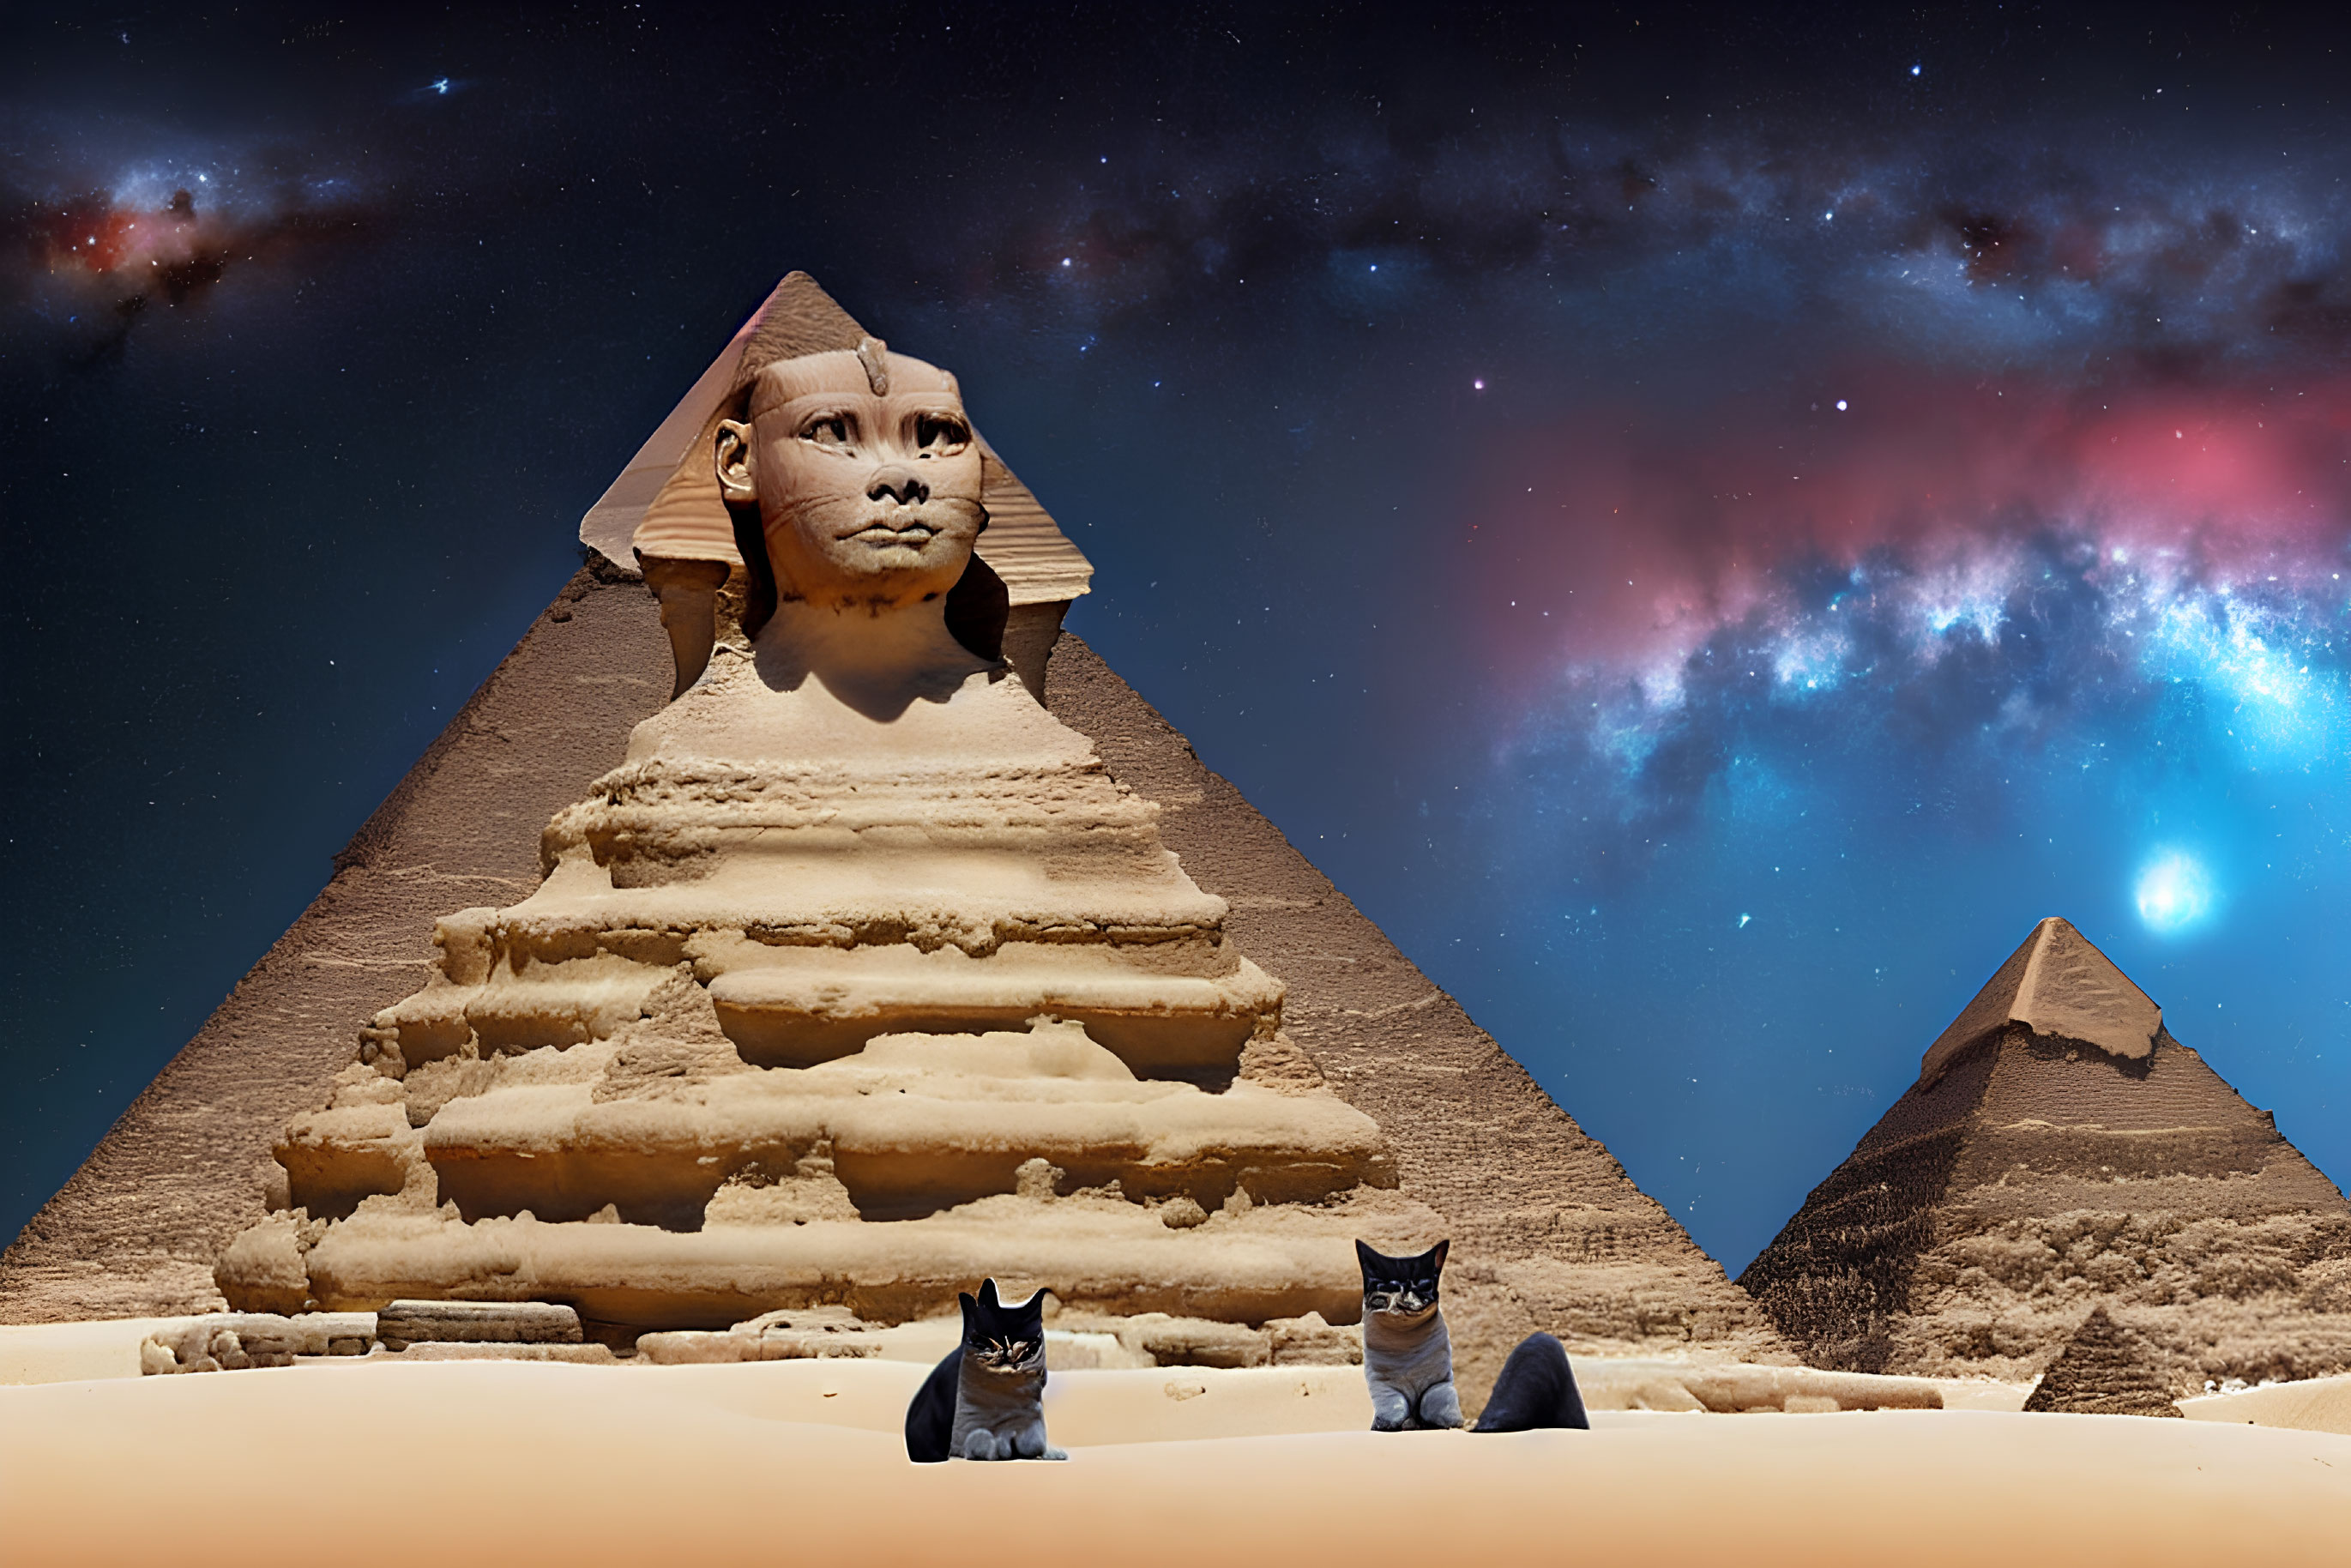 Great Sphinx and Pyramid in Giza with Cats Under Starry Night Sky